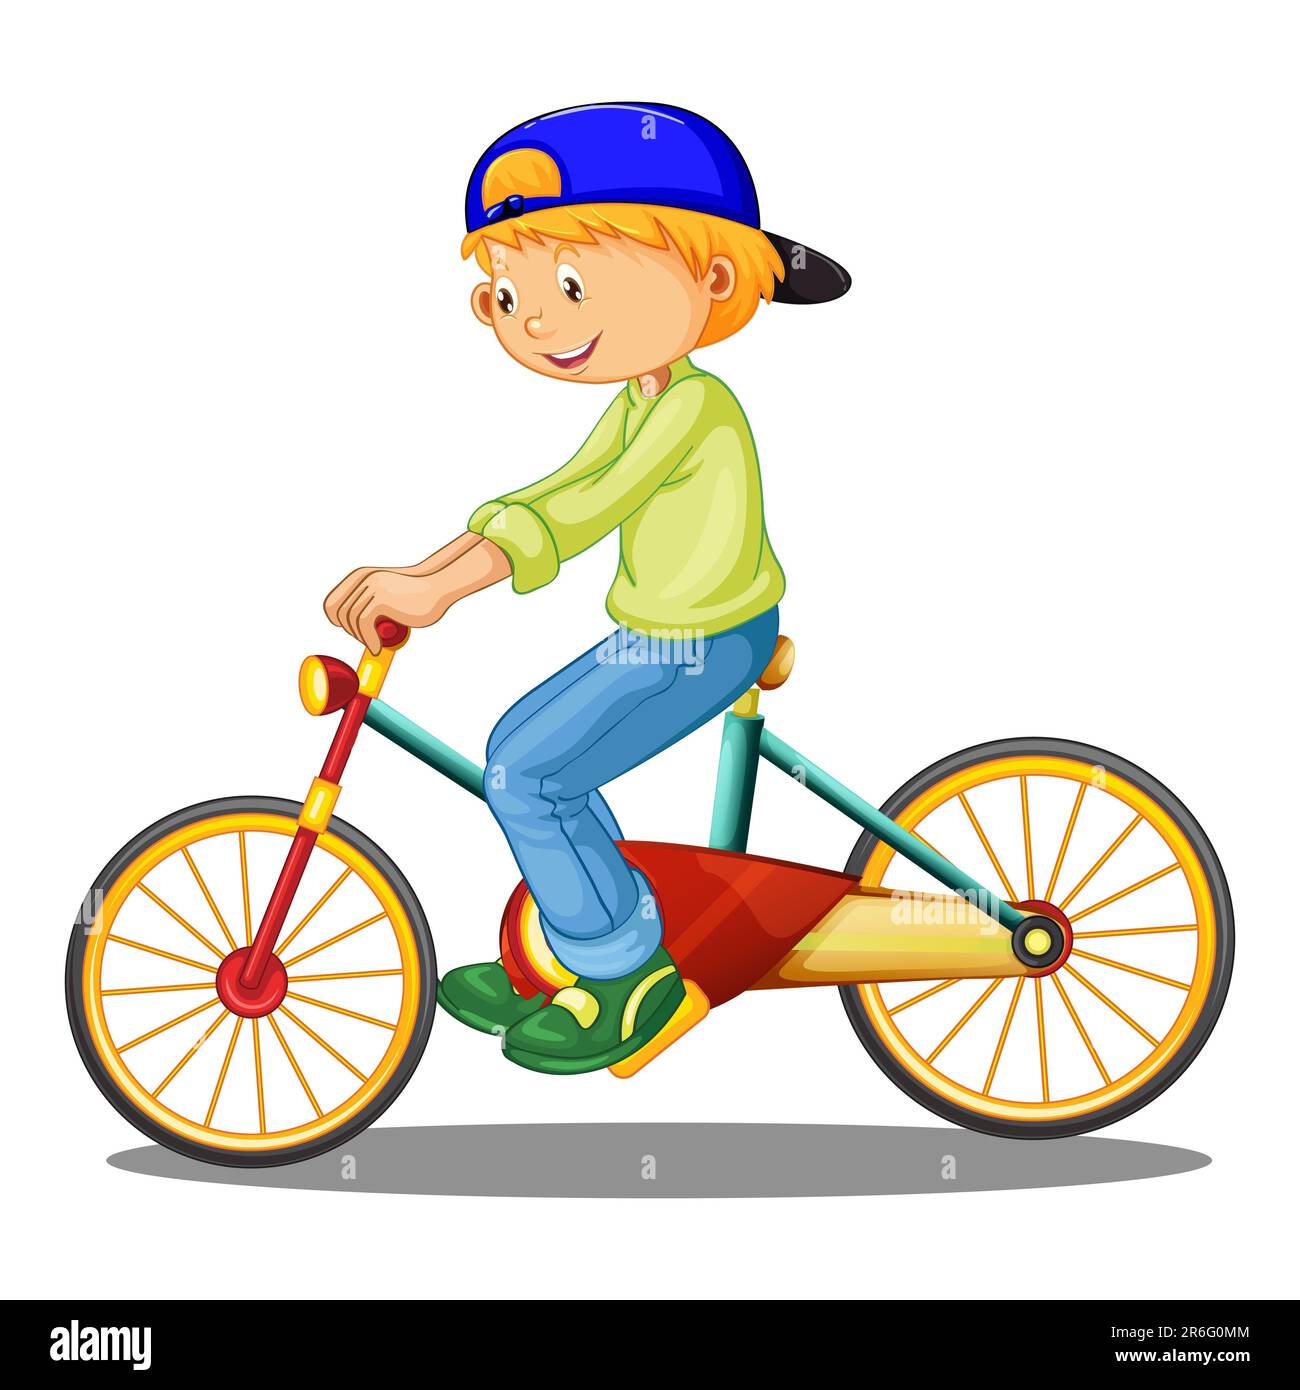 An illustration features a young boy on a bicycle Stock Photo